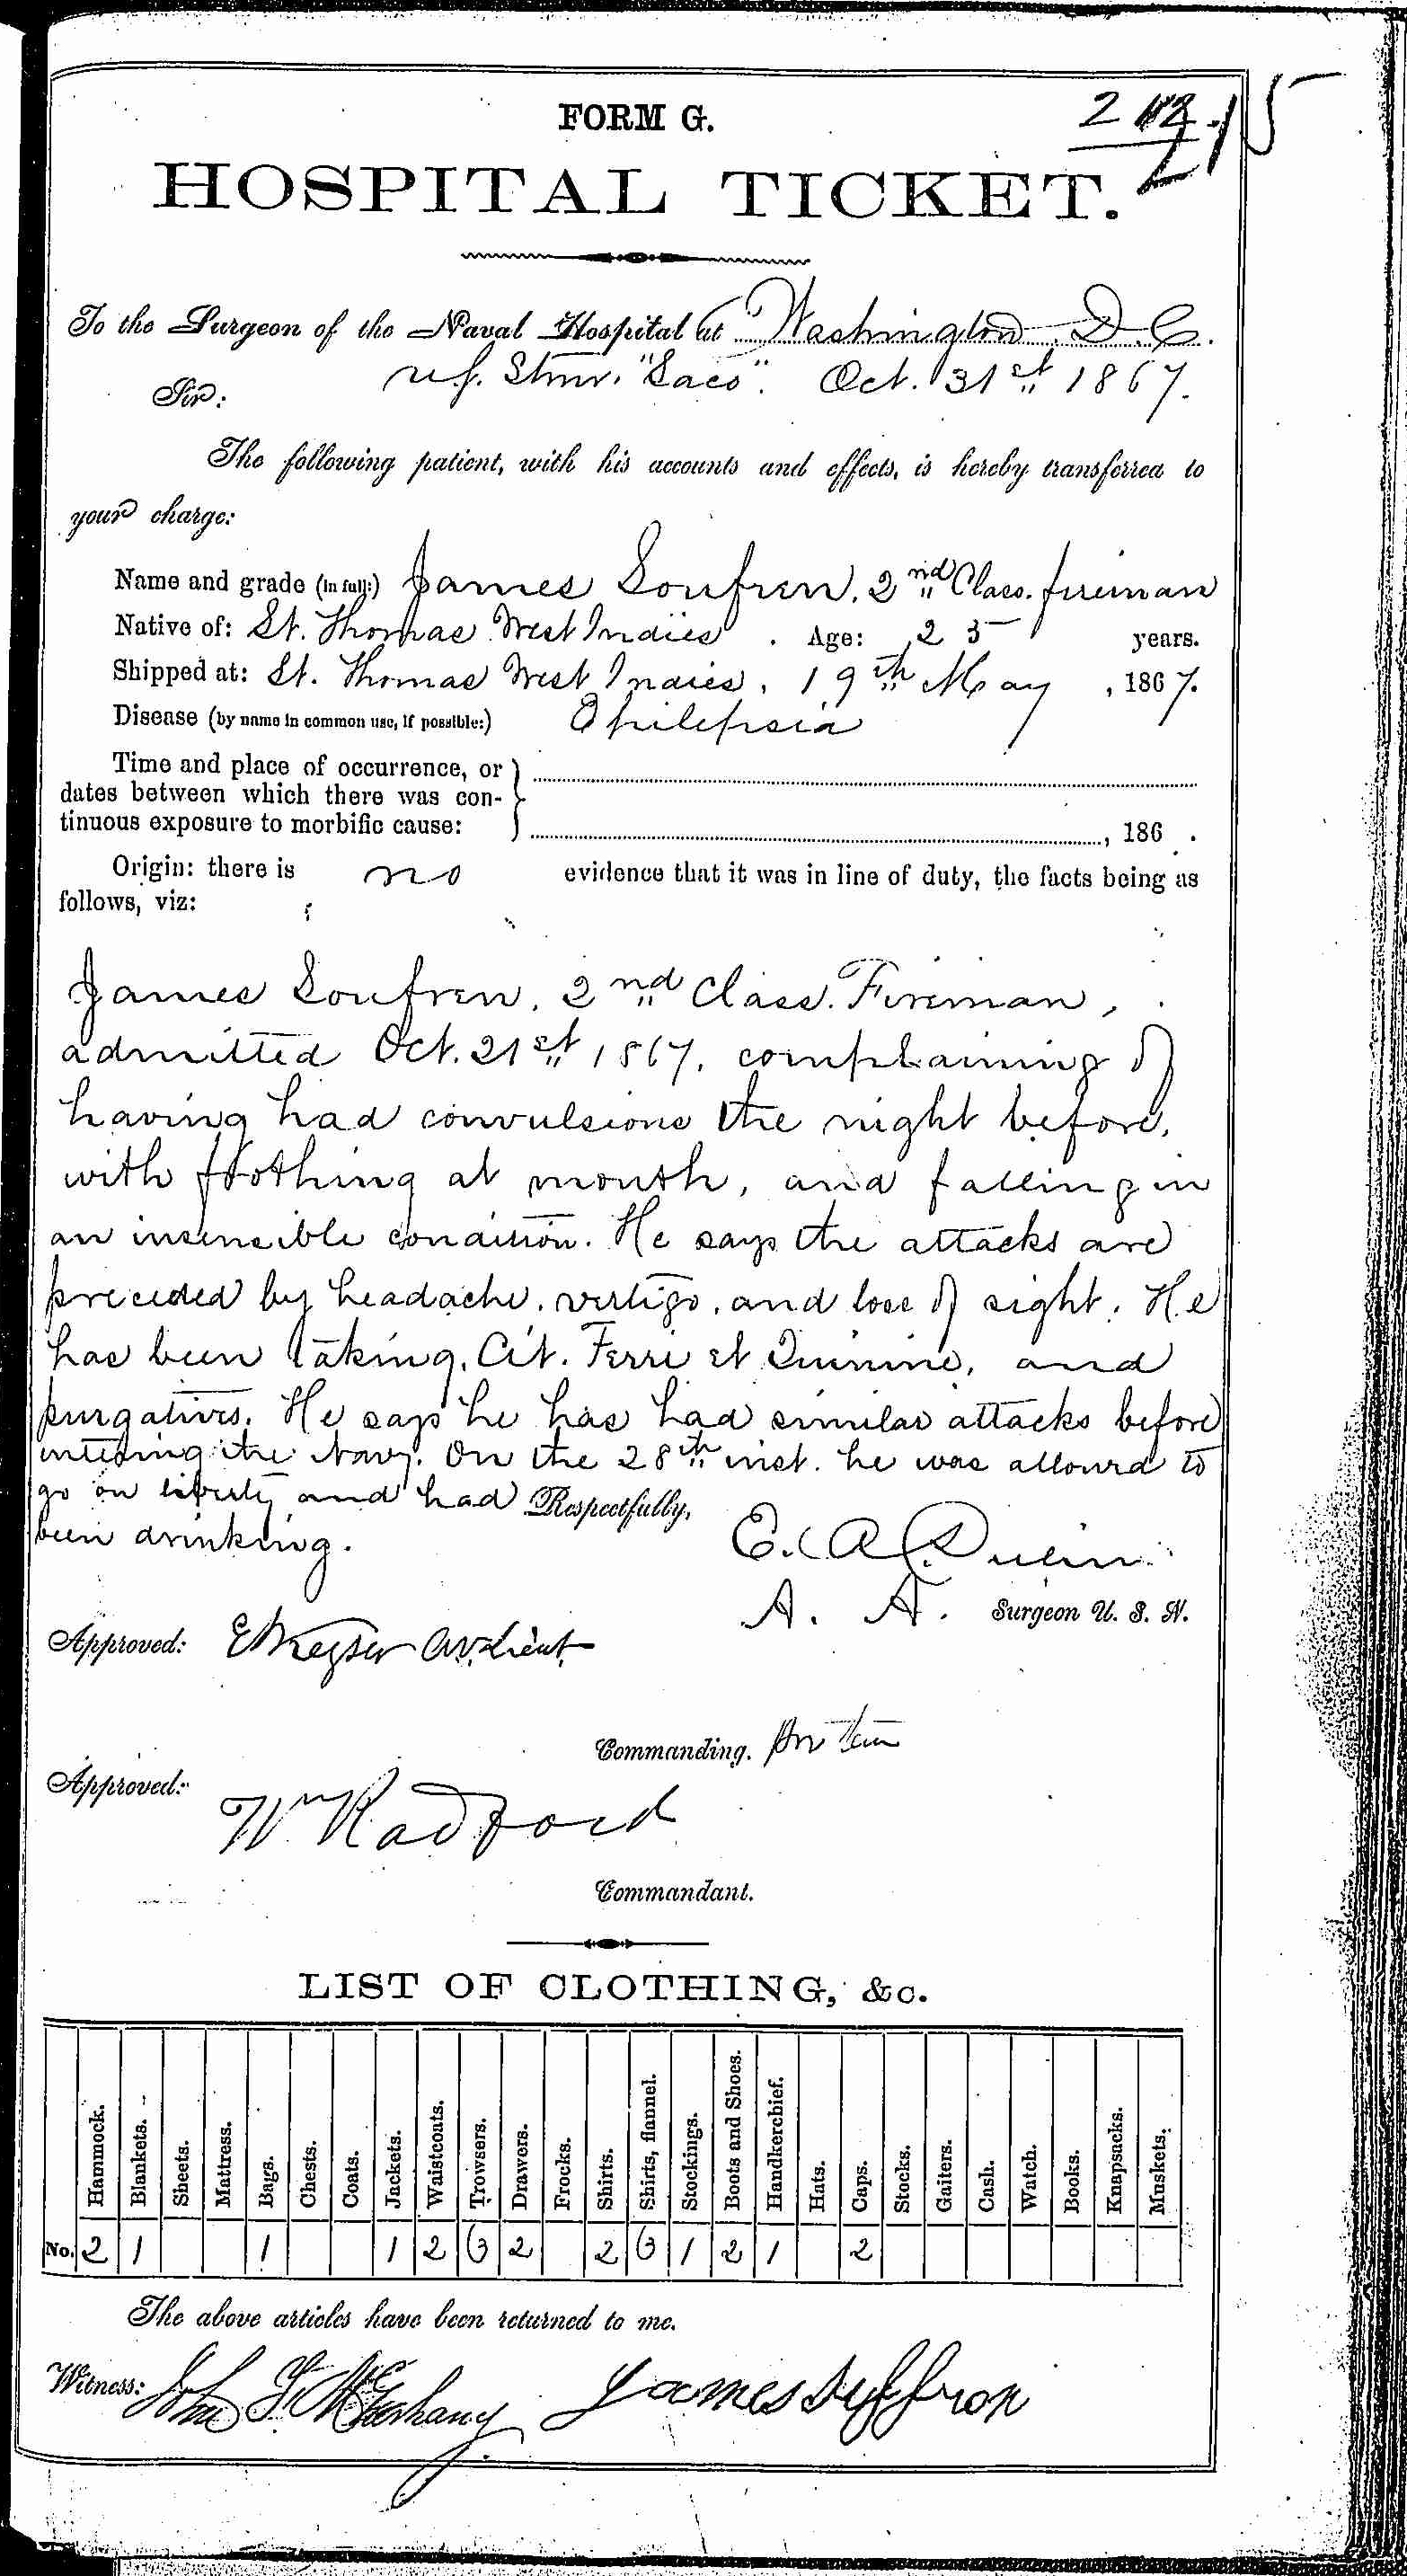 Entry for James Soufren (page 1 of 2) in the log Hospital Tickets and Case Papers - Naval Hospital - Washington, D.C. - 1866-68